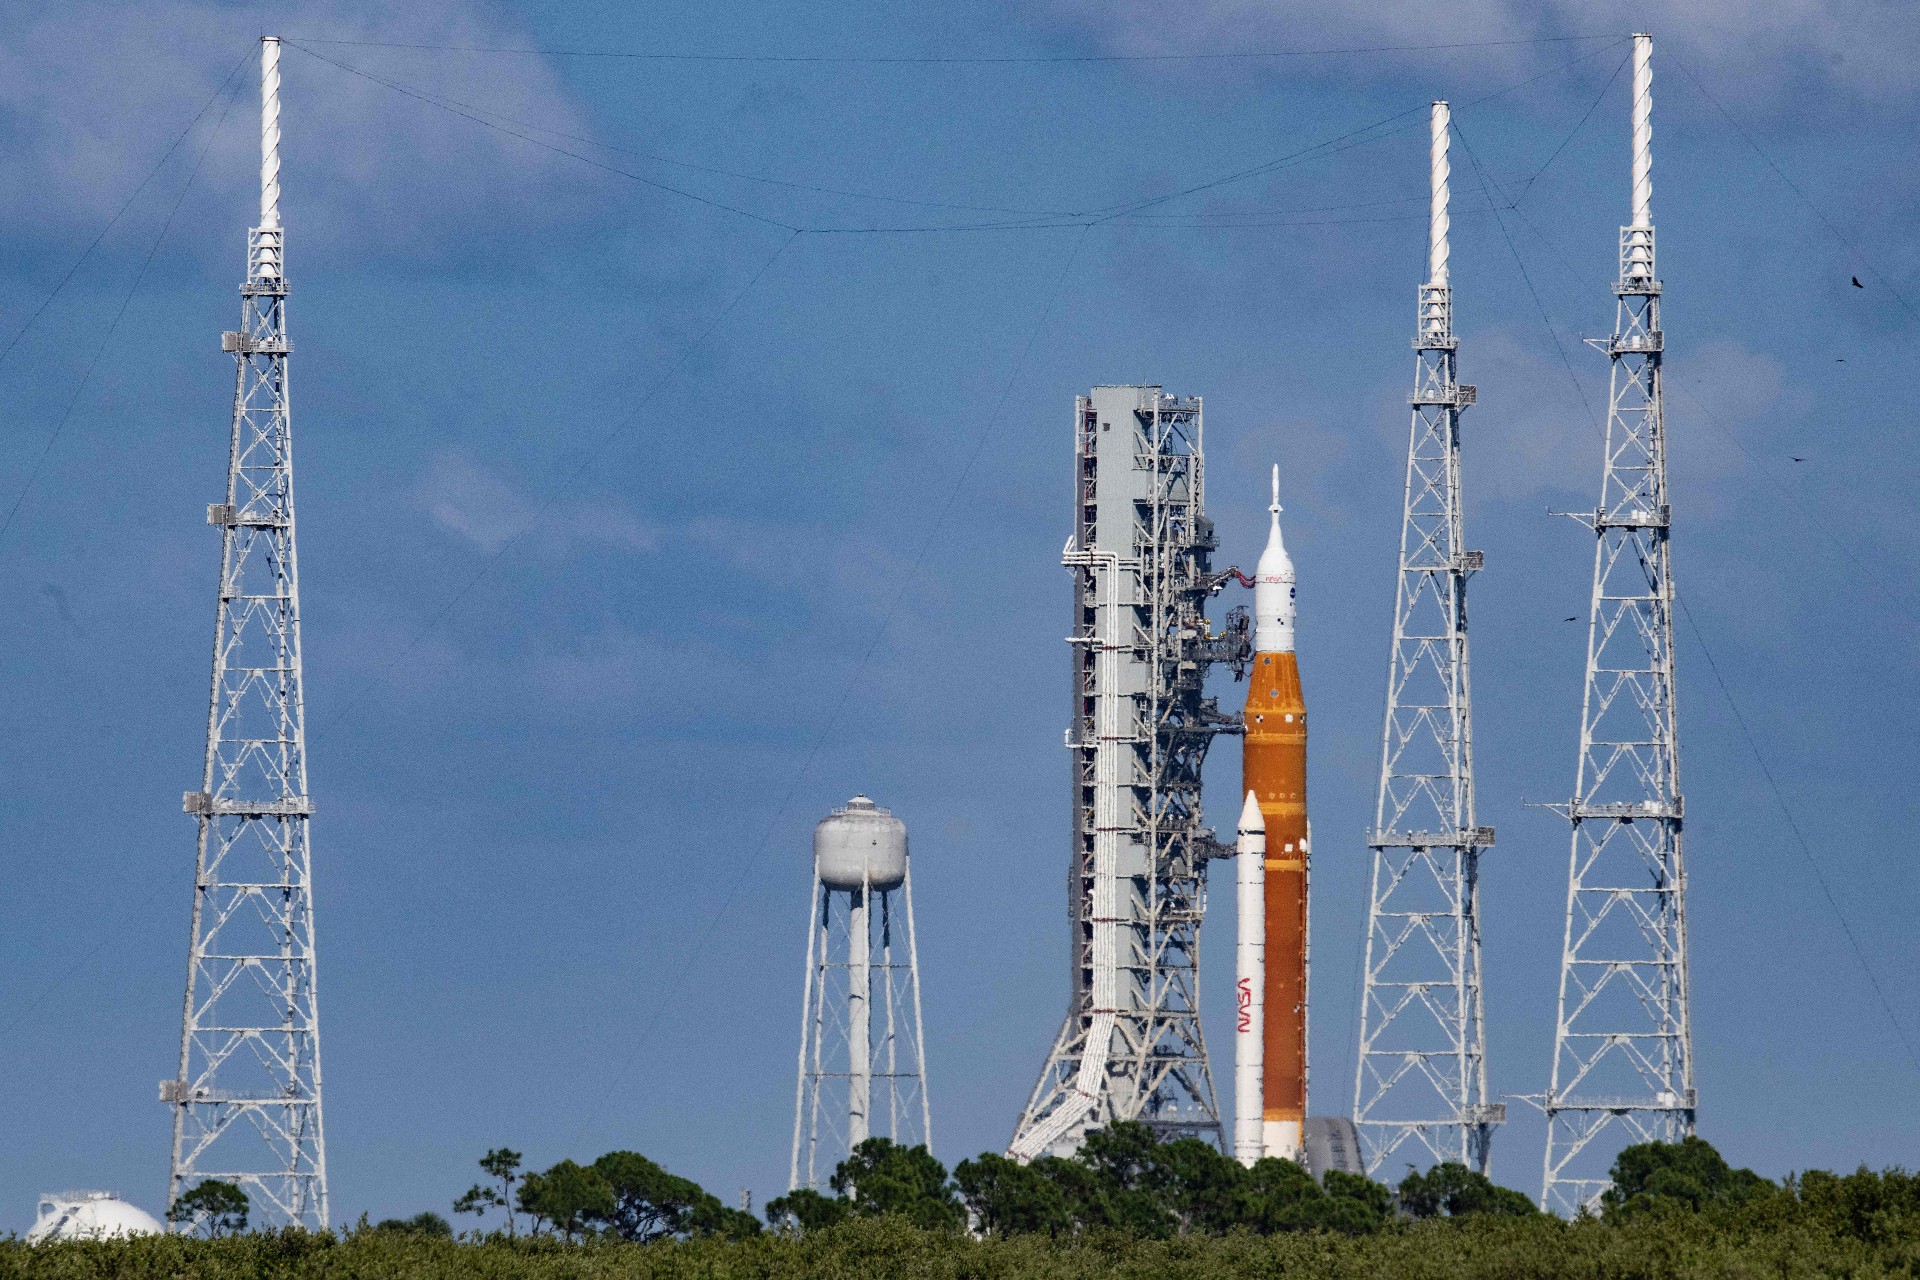 NASA has canceled a planned September 27 launch of the Artemis I rocket due to Hurricane Ian, which is forecast to strengthen as it nears Florida.